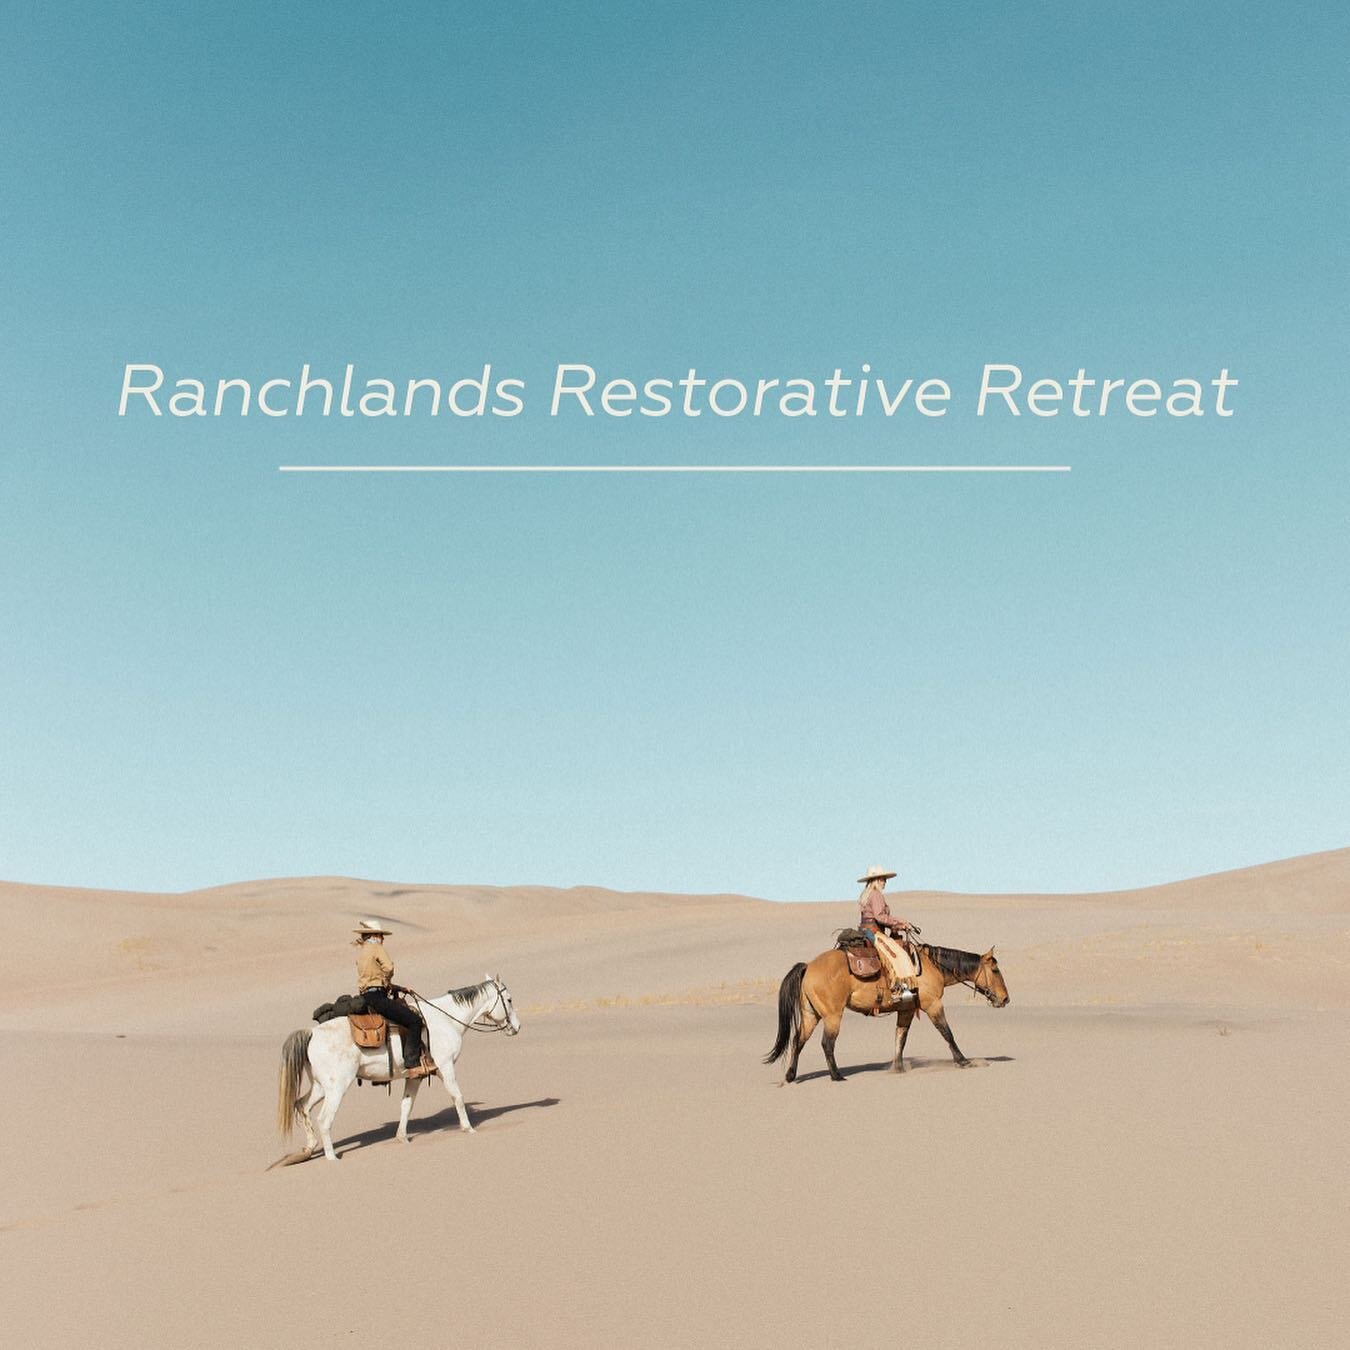 Looking for a place to (safely) unwind this spring? ⁠⁠
⁠⁠
@thedeepwell and I are beyond excited to introduce you to the beauty of @ranchlands. ⁠⁠
⁠⁠
Not only is the experience a one-of-a-kind journey, but the outdoor dining and private rooms will ens